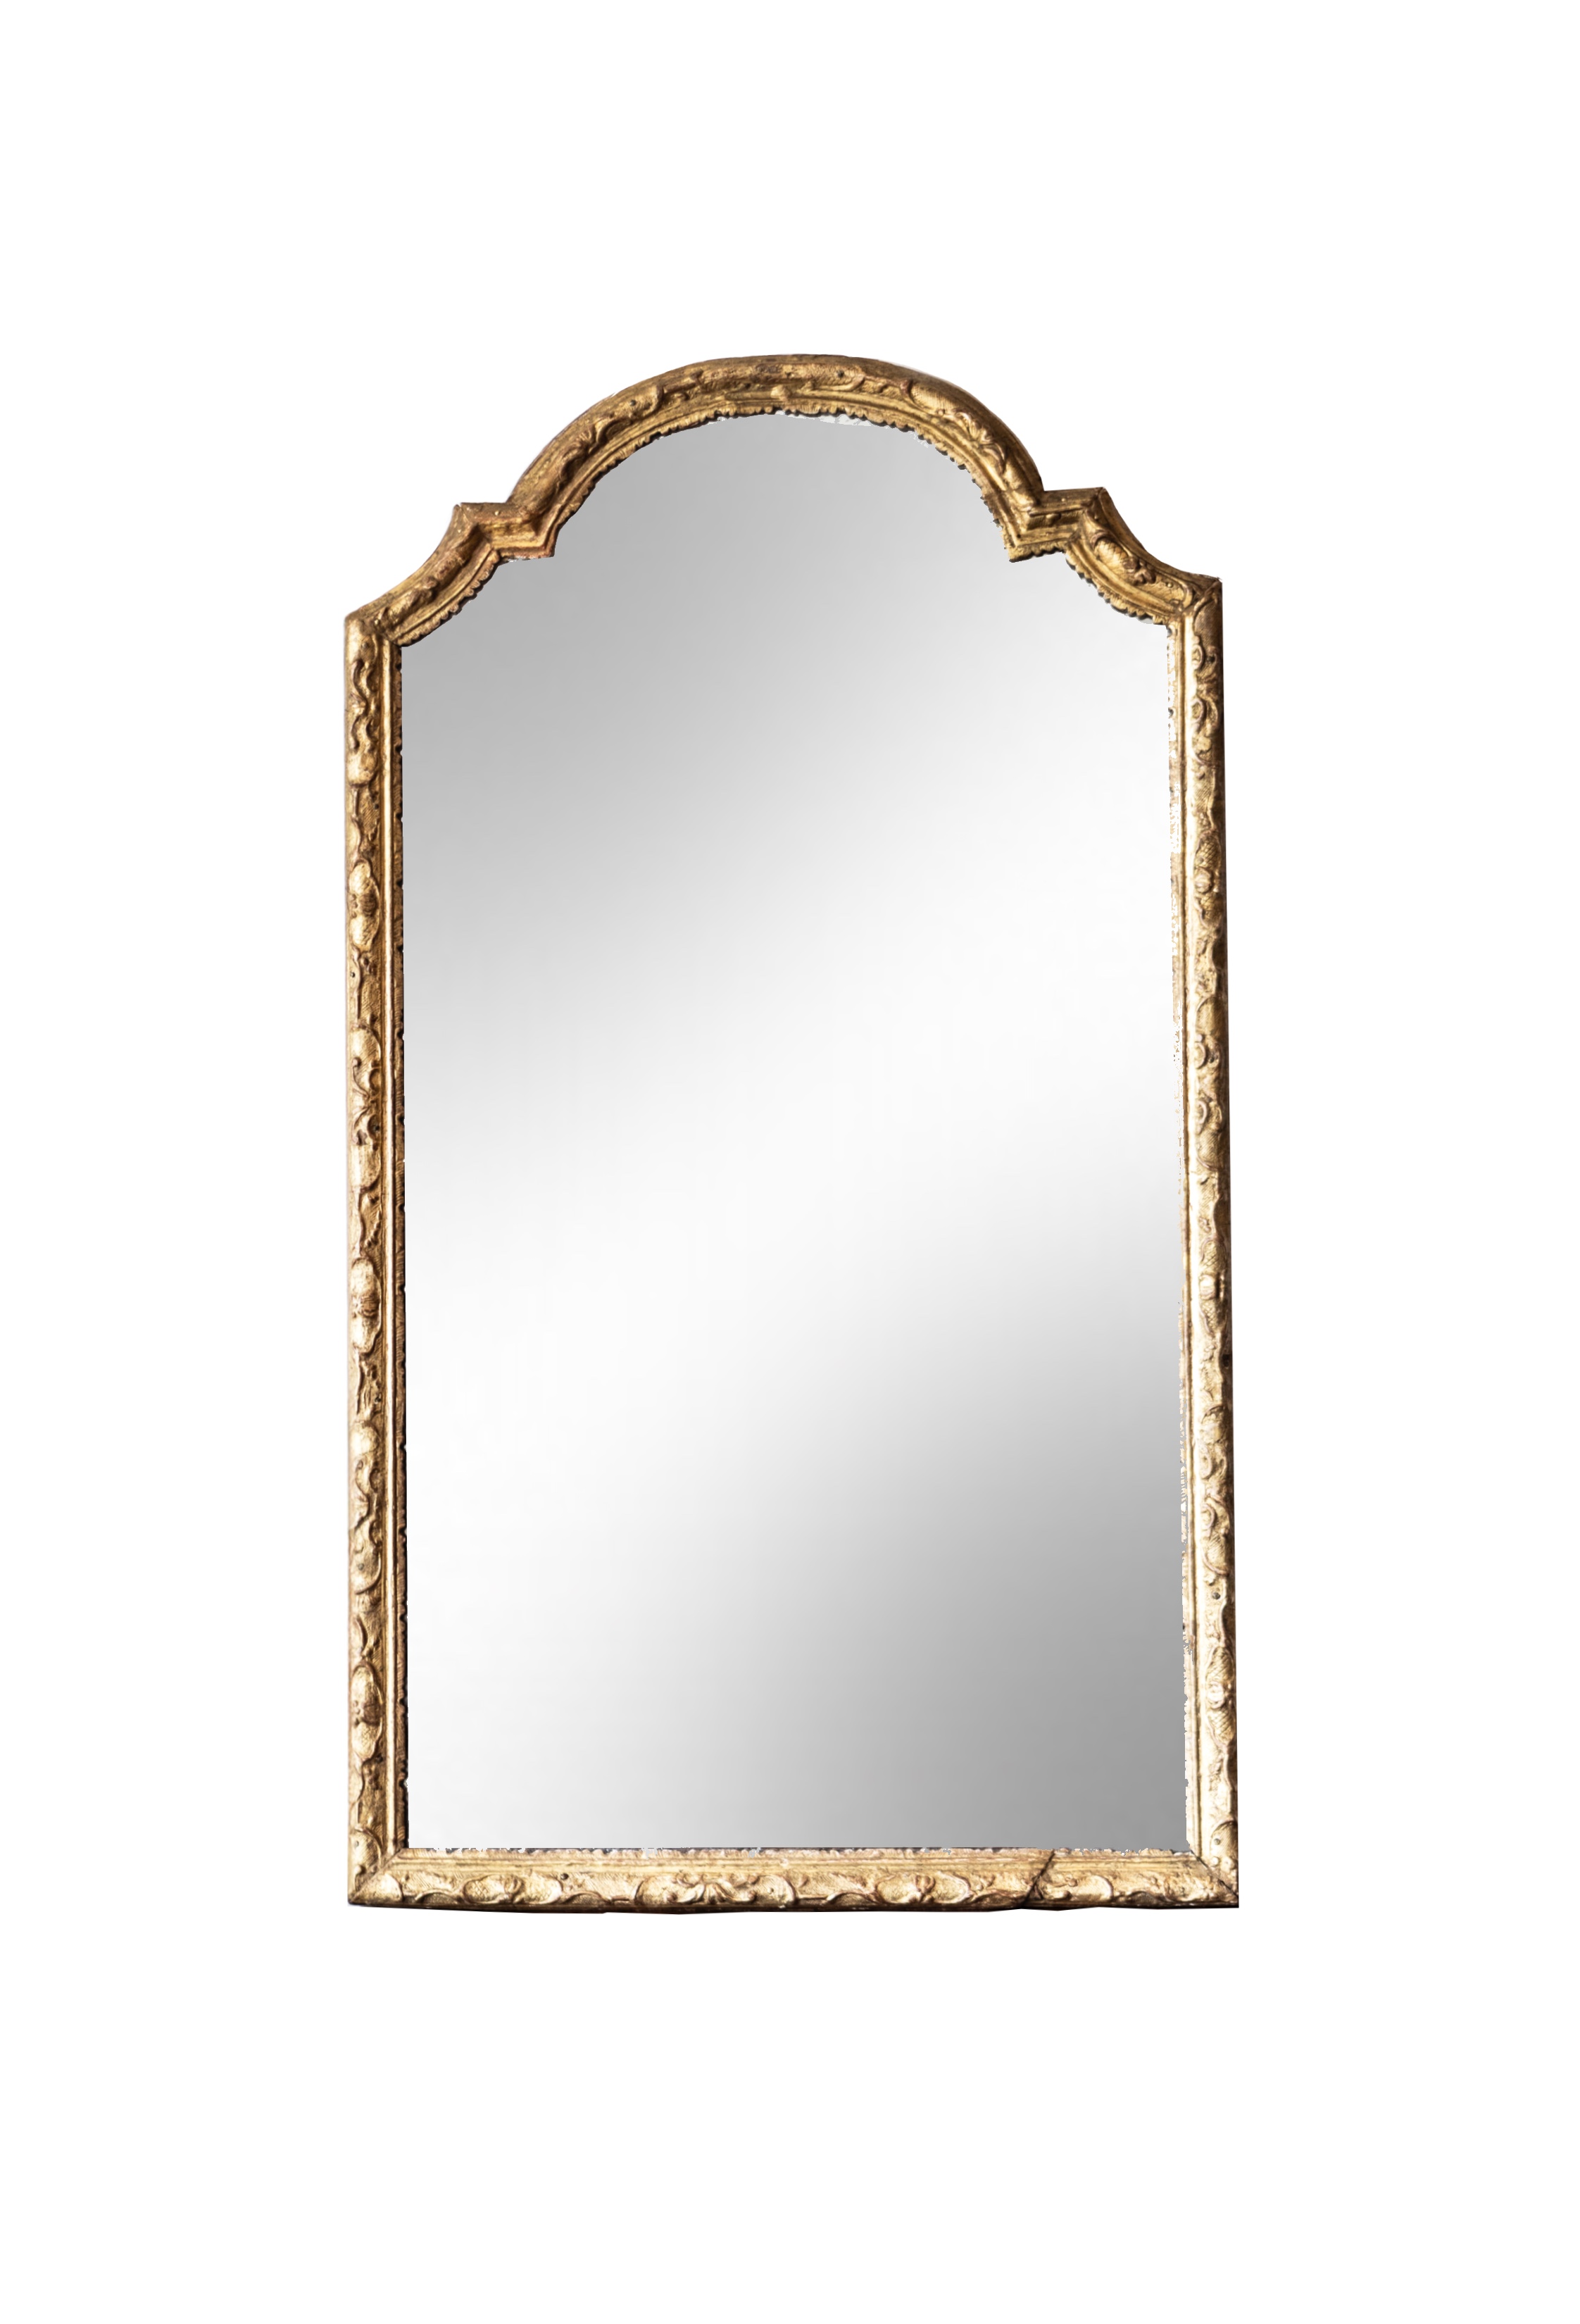 Early 18th Century French Louis XIV Mirror